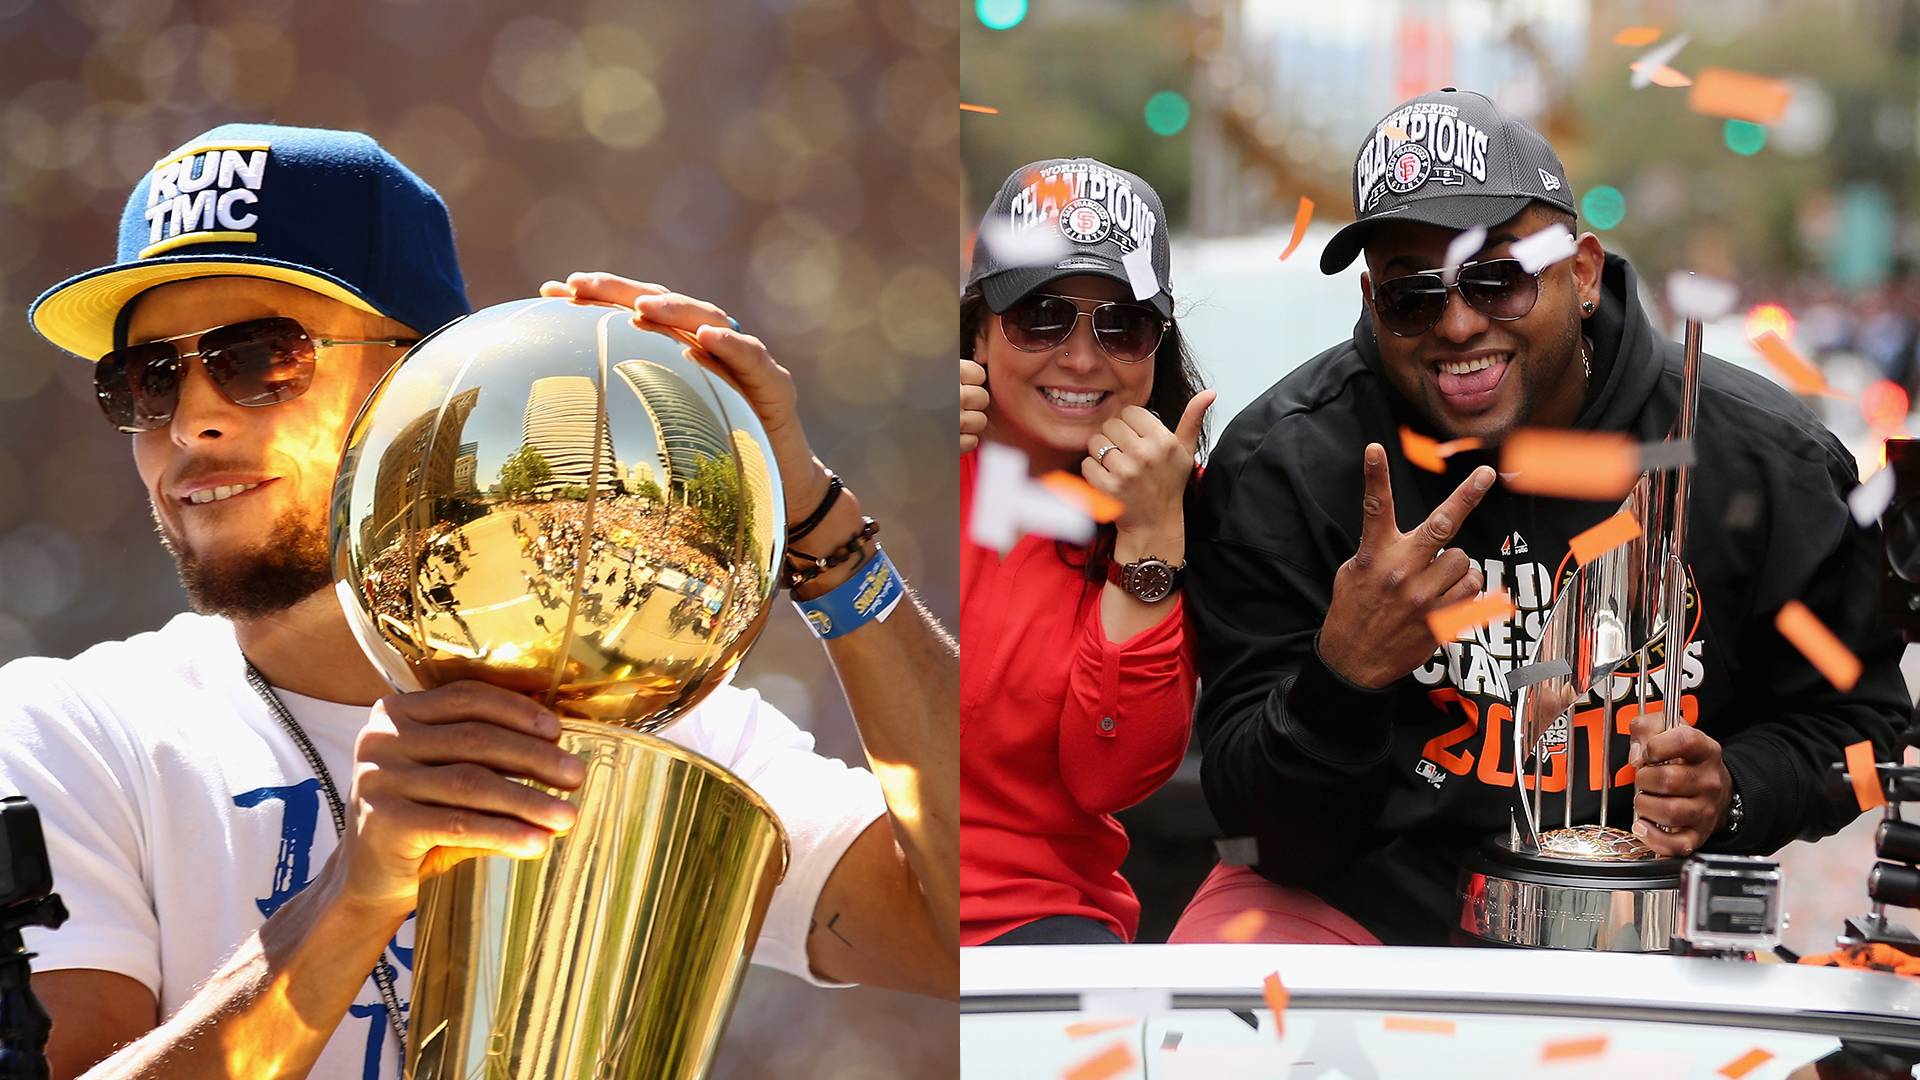 Left: Steph Curry at the Golden State Warriors victory parade in Oakland in 2018. Right: Pablo Sandoval at the San Francisco Giants World Series victory parade in 2012. Ezra Shaw/Getty Images